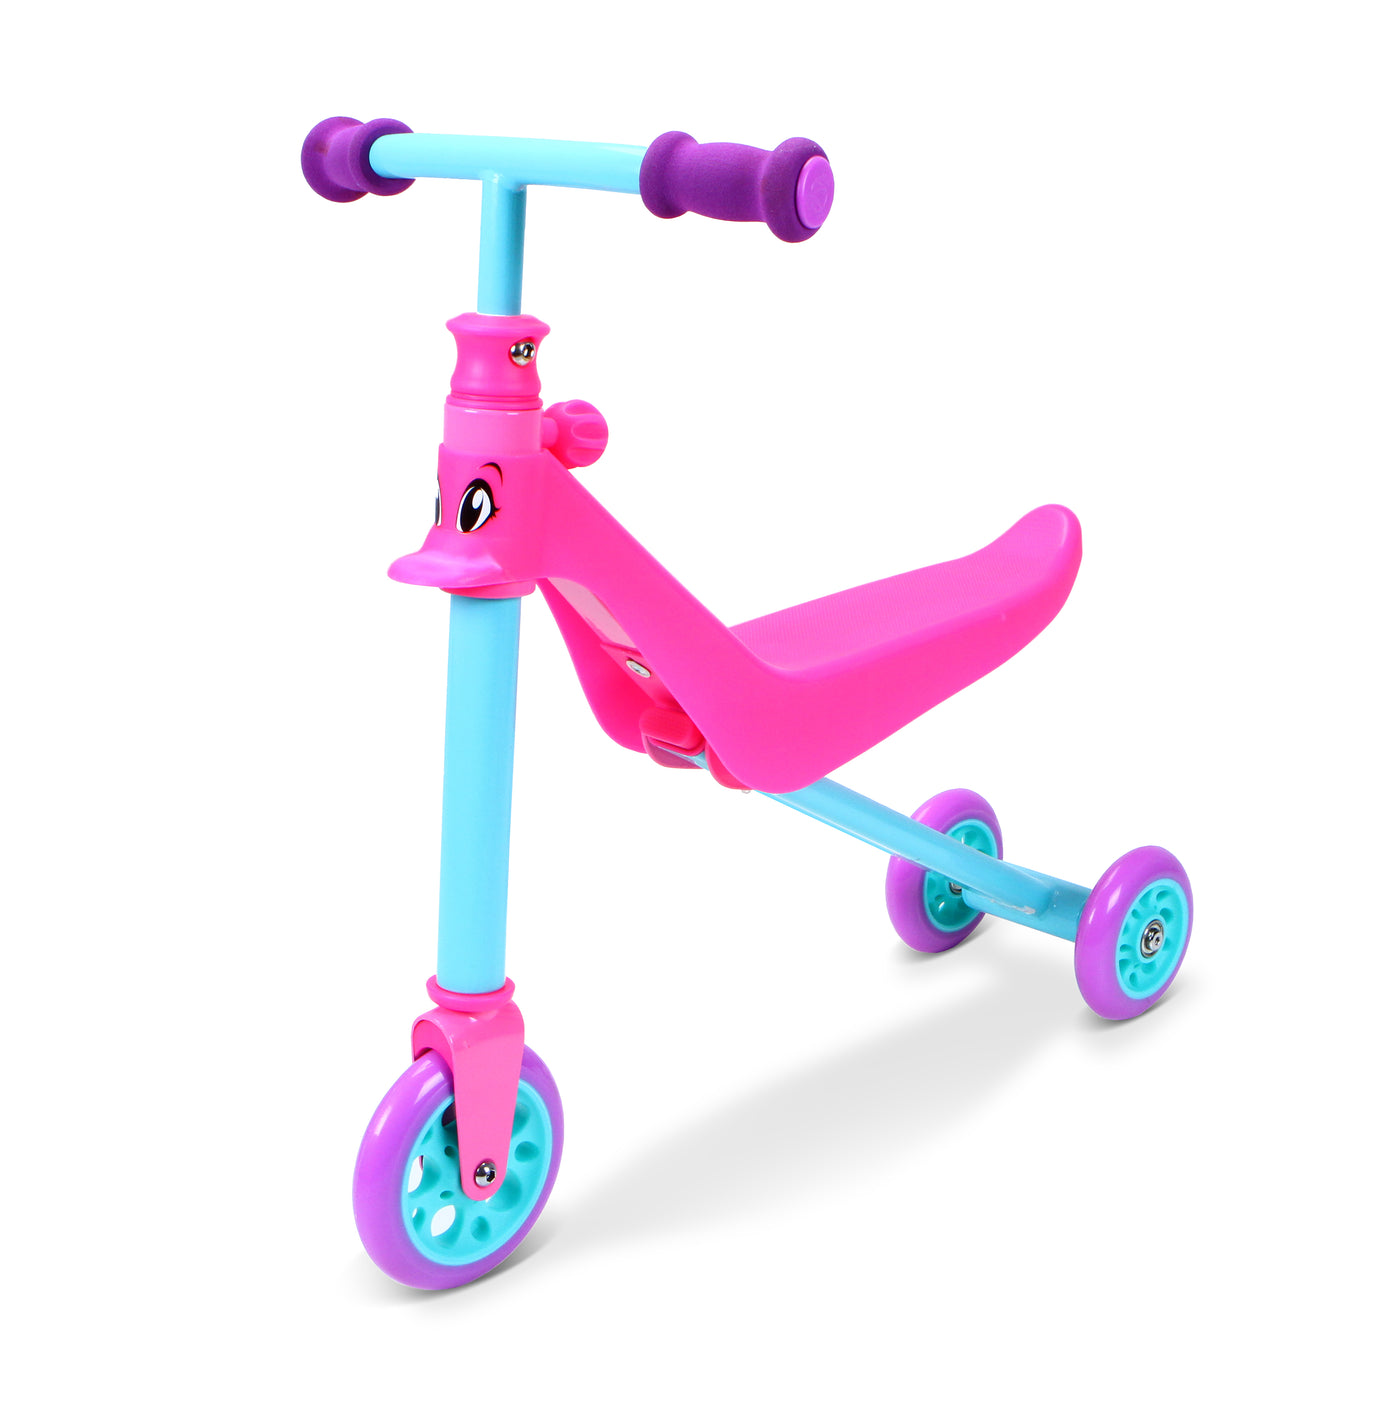 ZYCOM ZYKSTER SCOOTER 2-IN-1 - Pink Teal